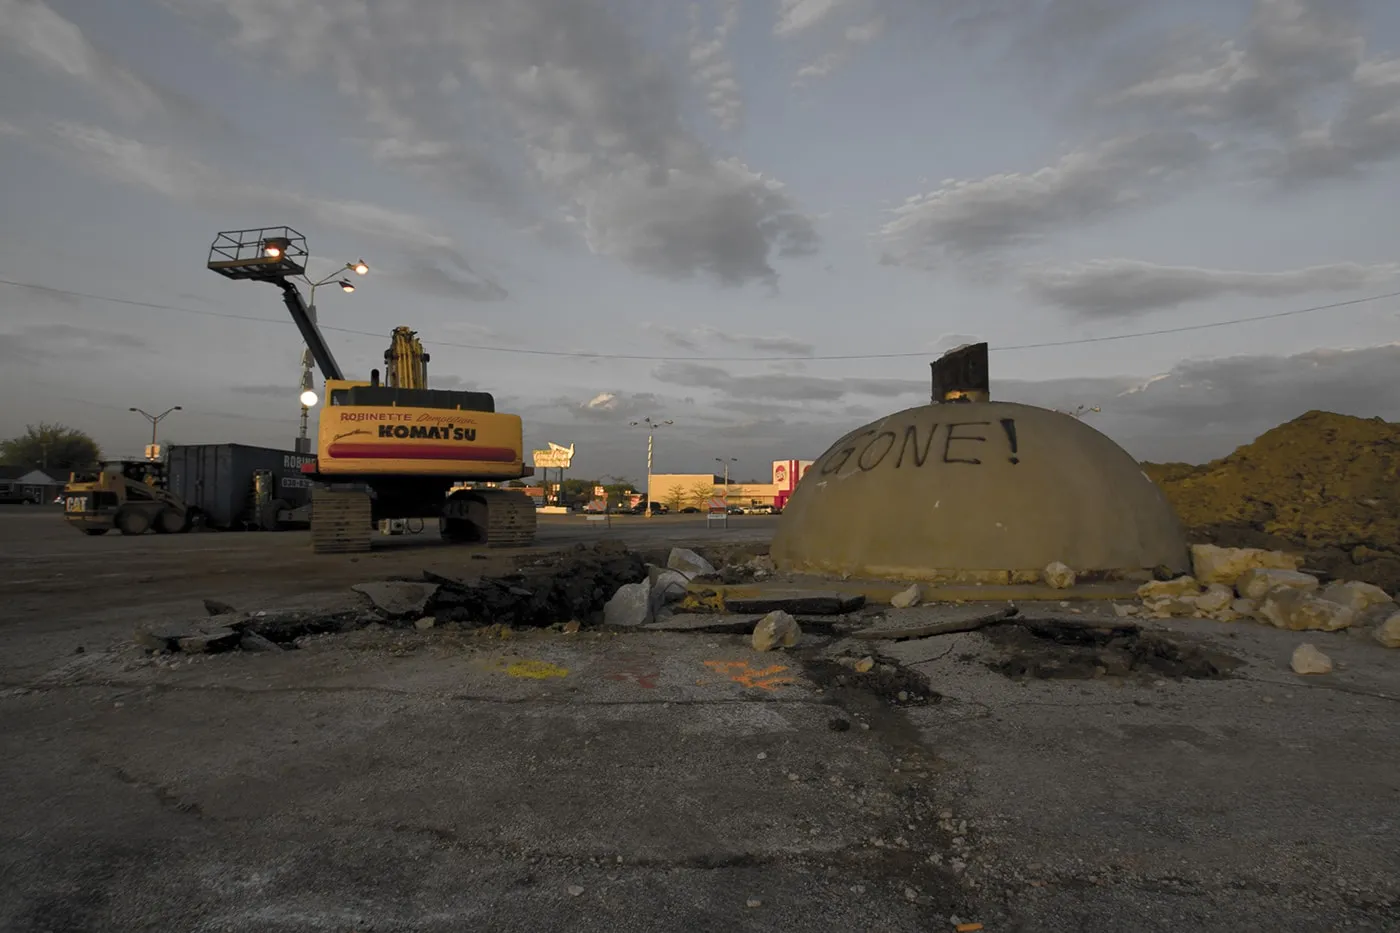 Remnants of the Spindle (car kabob, cars ona  spike) in Berwyn, Illinois after it was torn down in 2008.